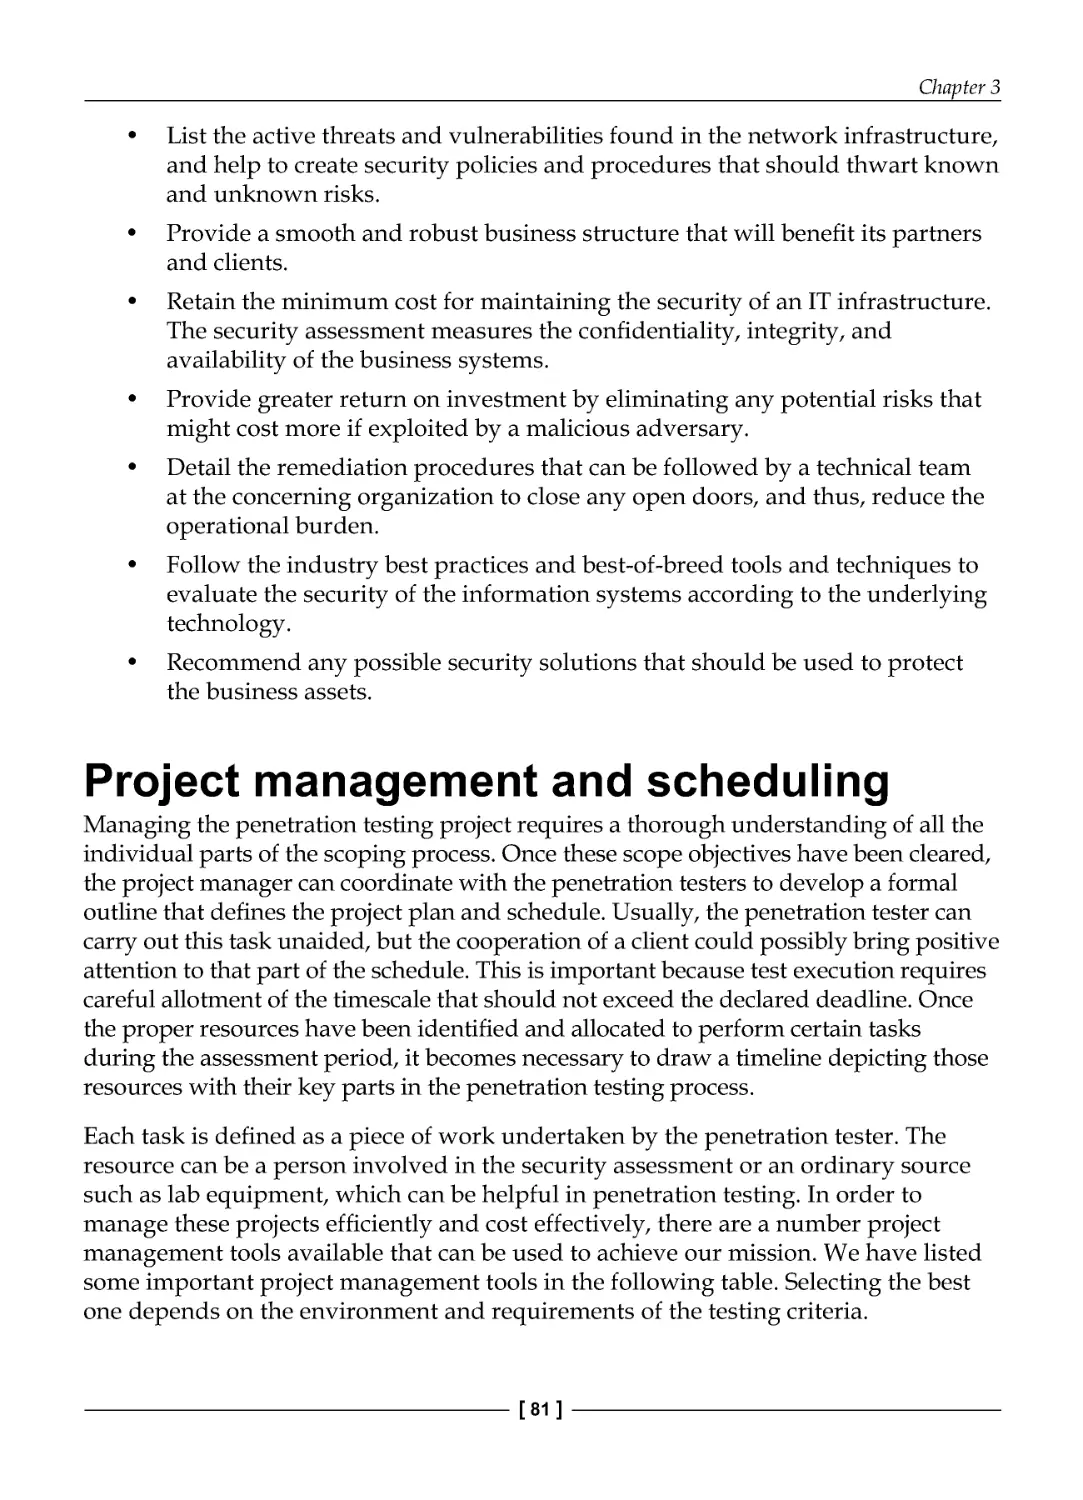 Project management and scheduling